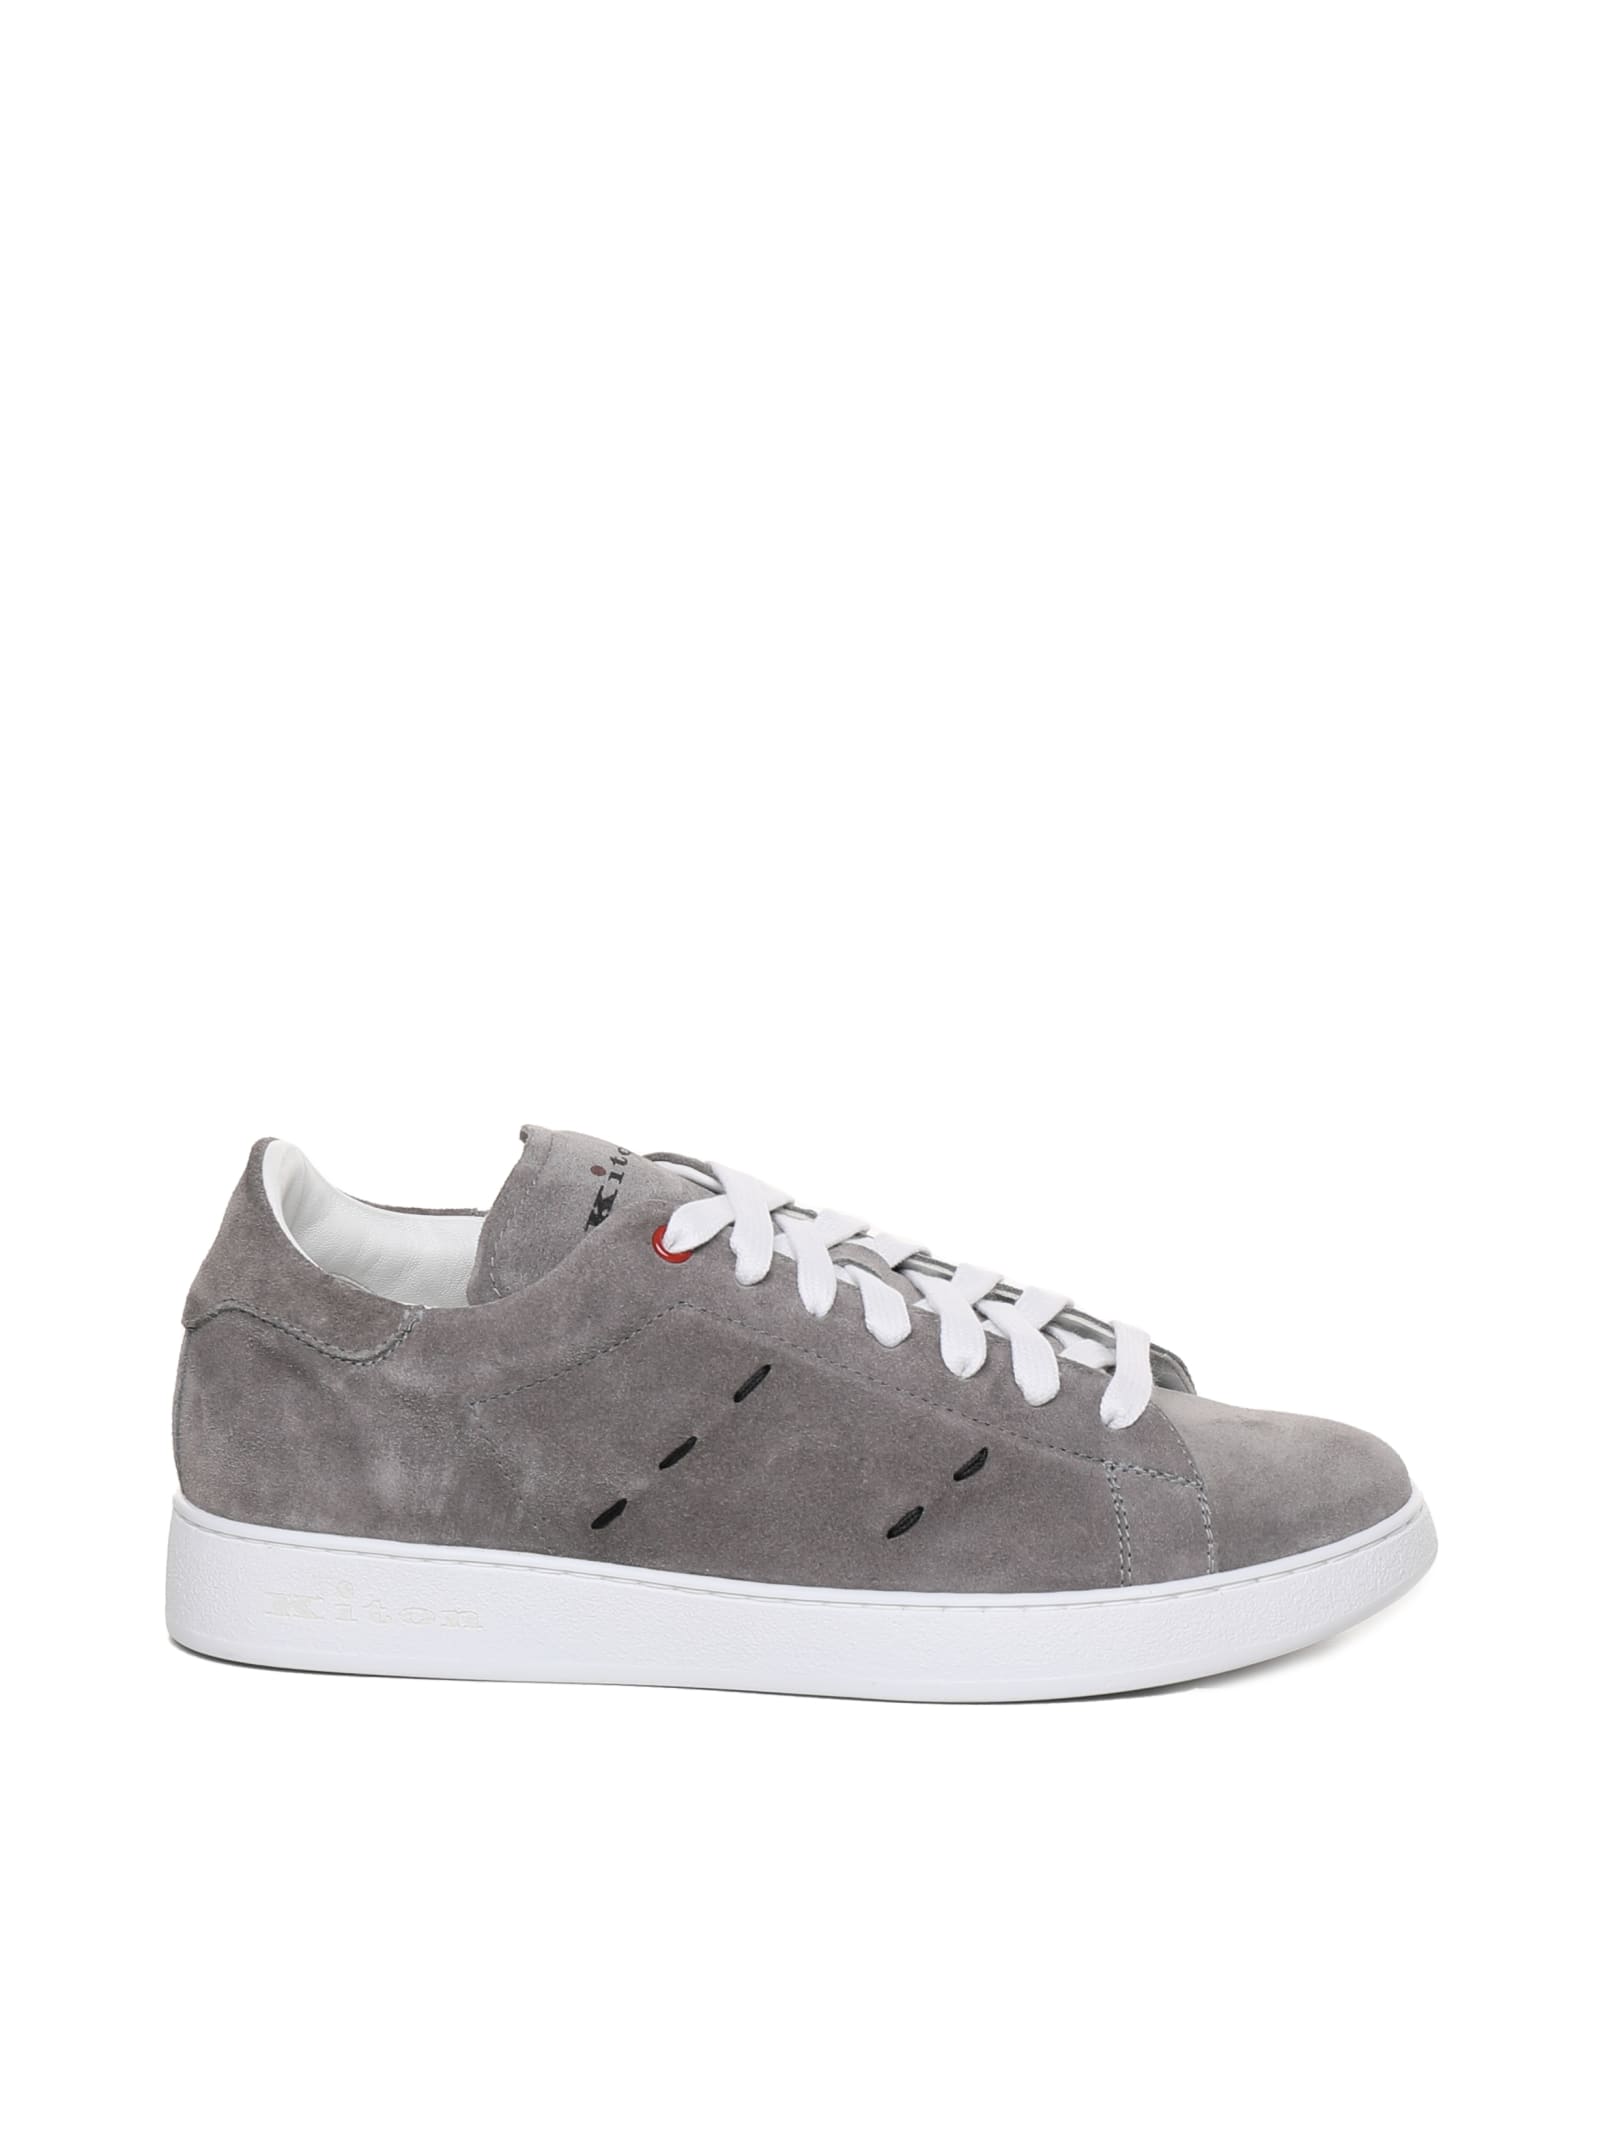 KITON LOW-TOP SNEAKERS WITH CONTRASTING STITCHING